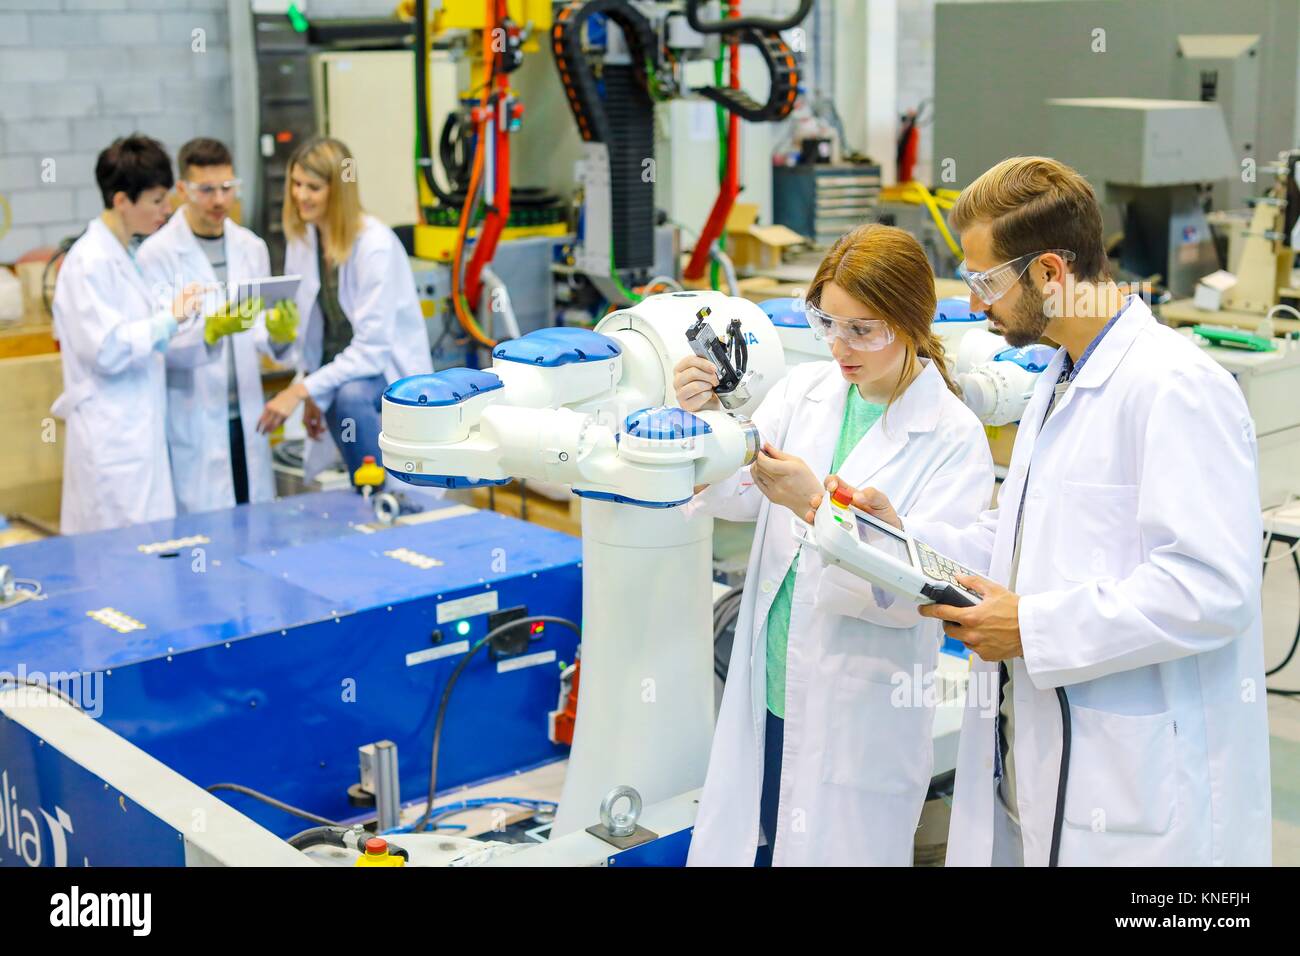 Two-arm robot for industrial handling. Researchers working on robot, Industry, Research and Technology Center, Tecnalia Research & Innovation, Stock Photo